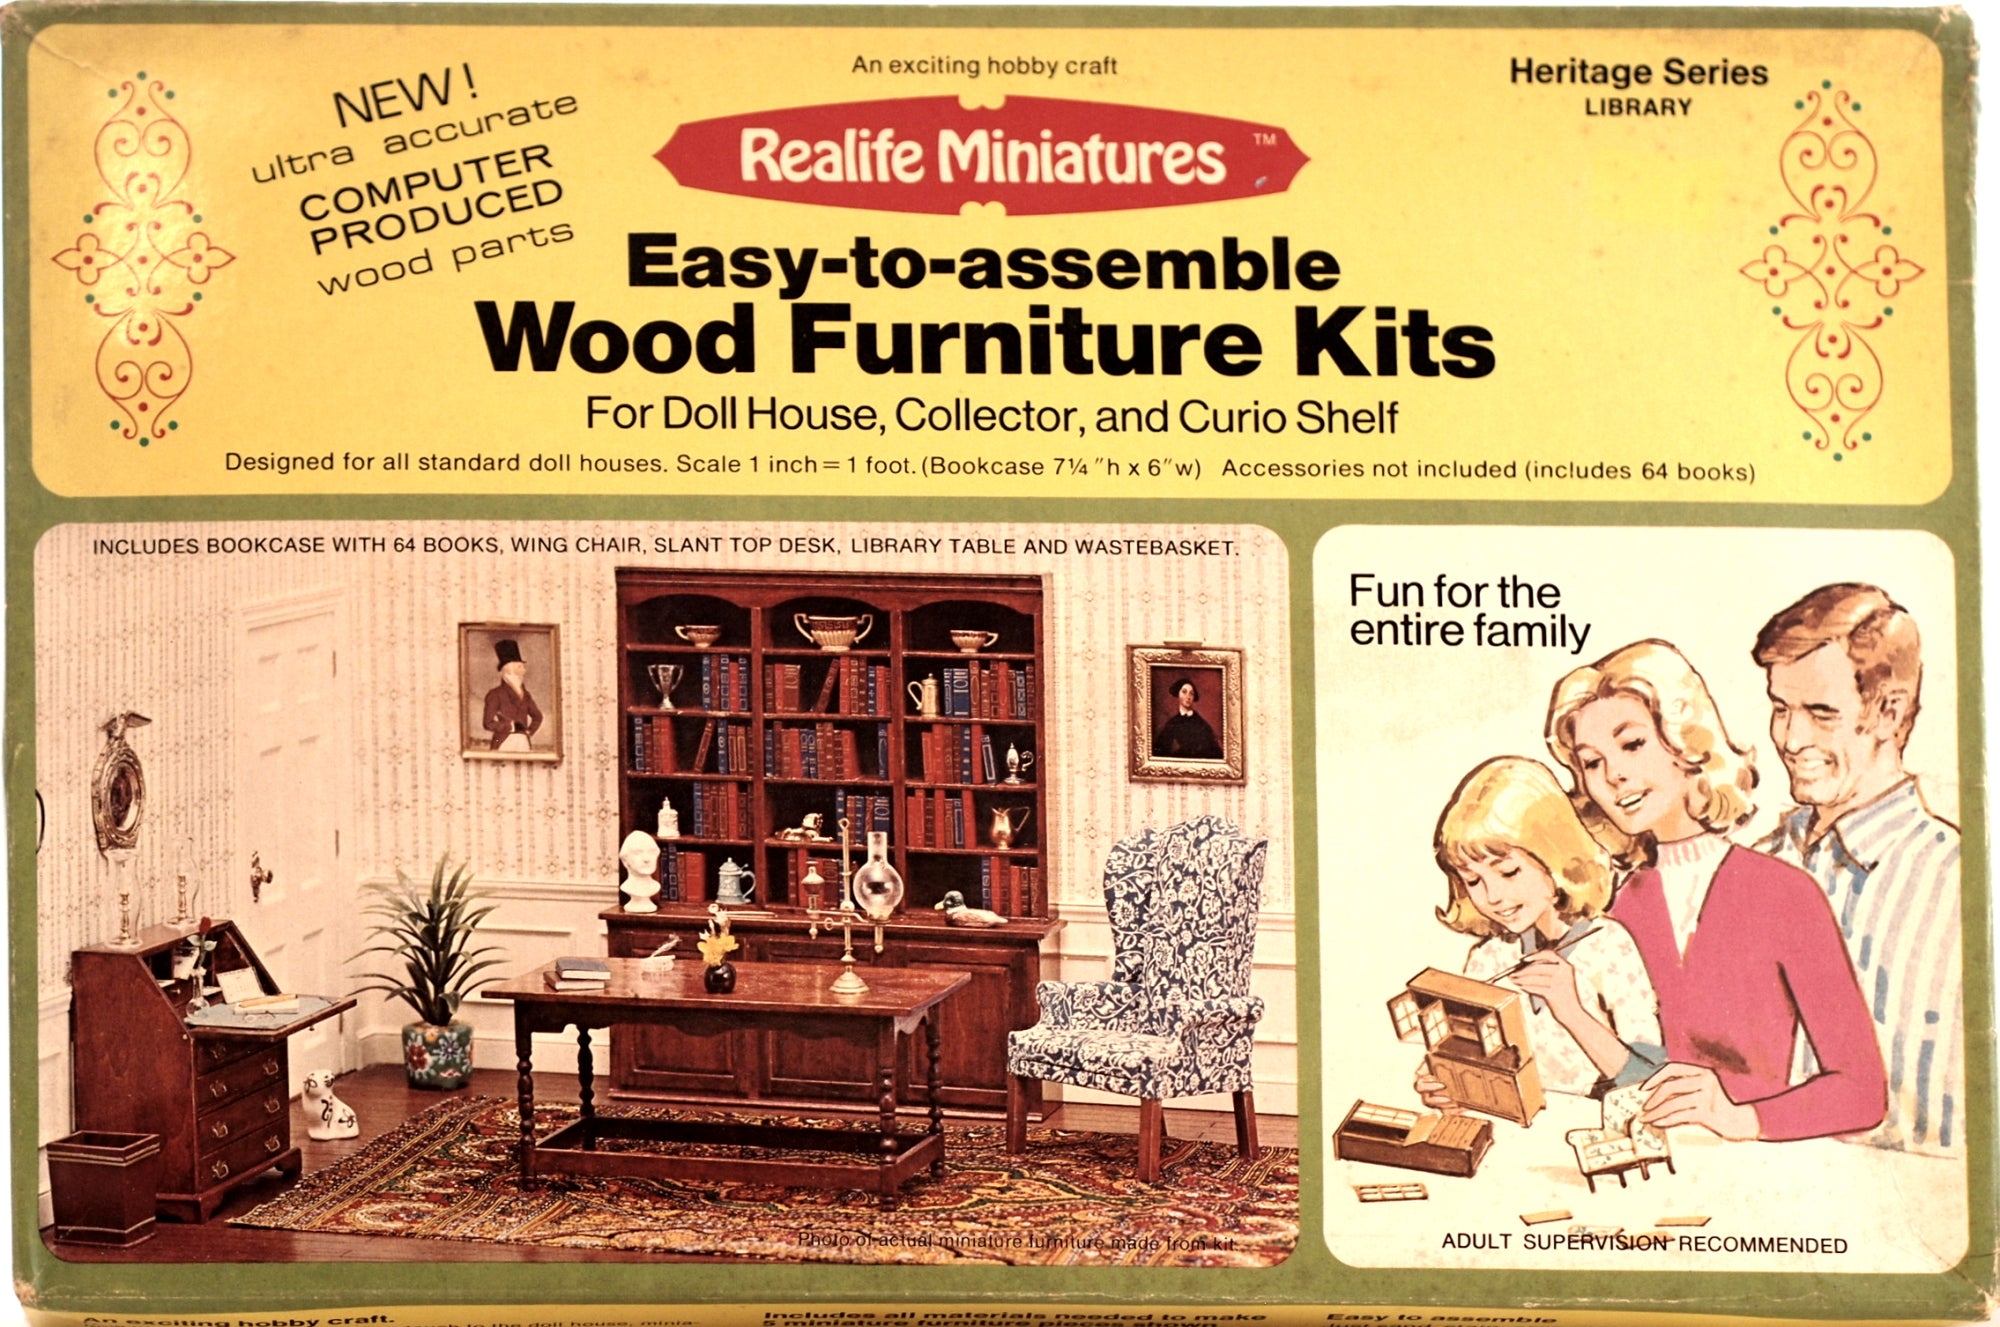 Realife Miniature Furniture Kit # 193 Heritage Series Library DIY Dollhouse by Scientific Models Miniatures